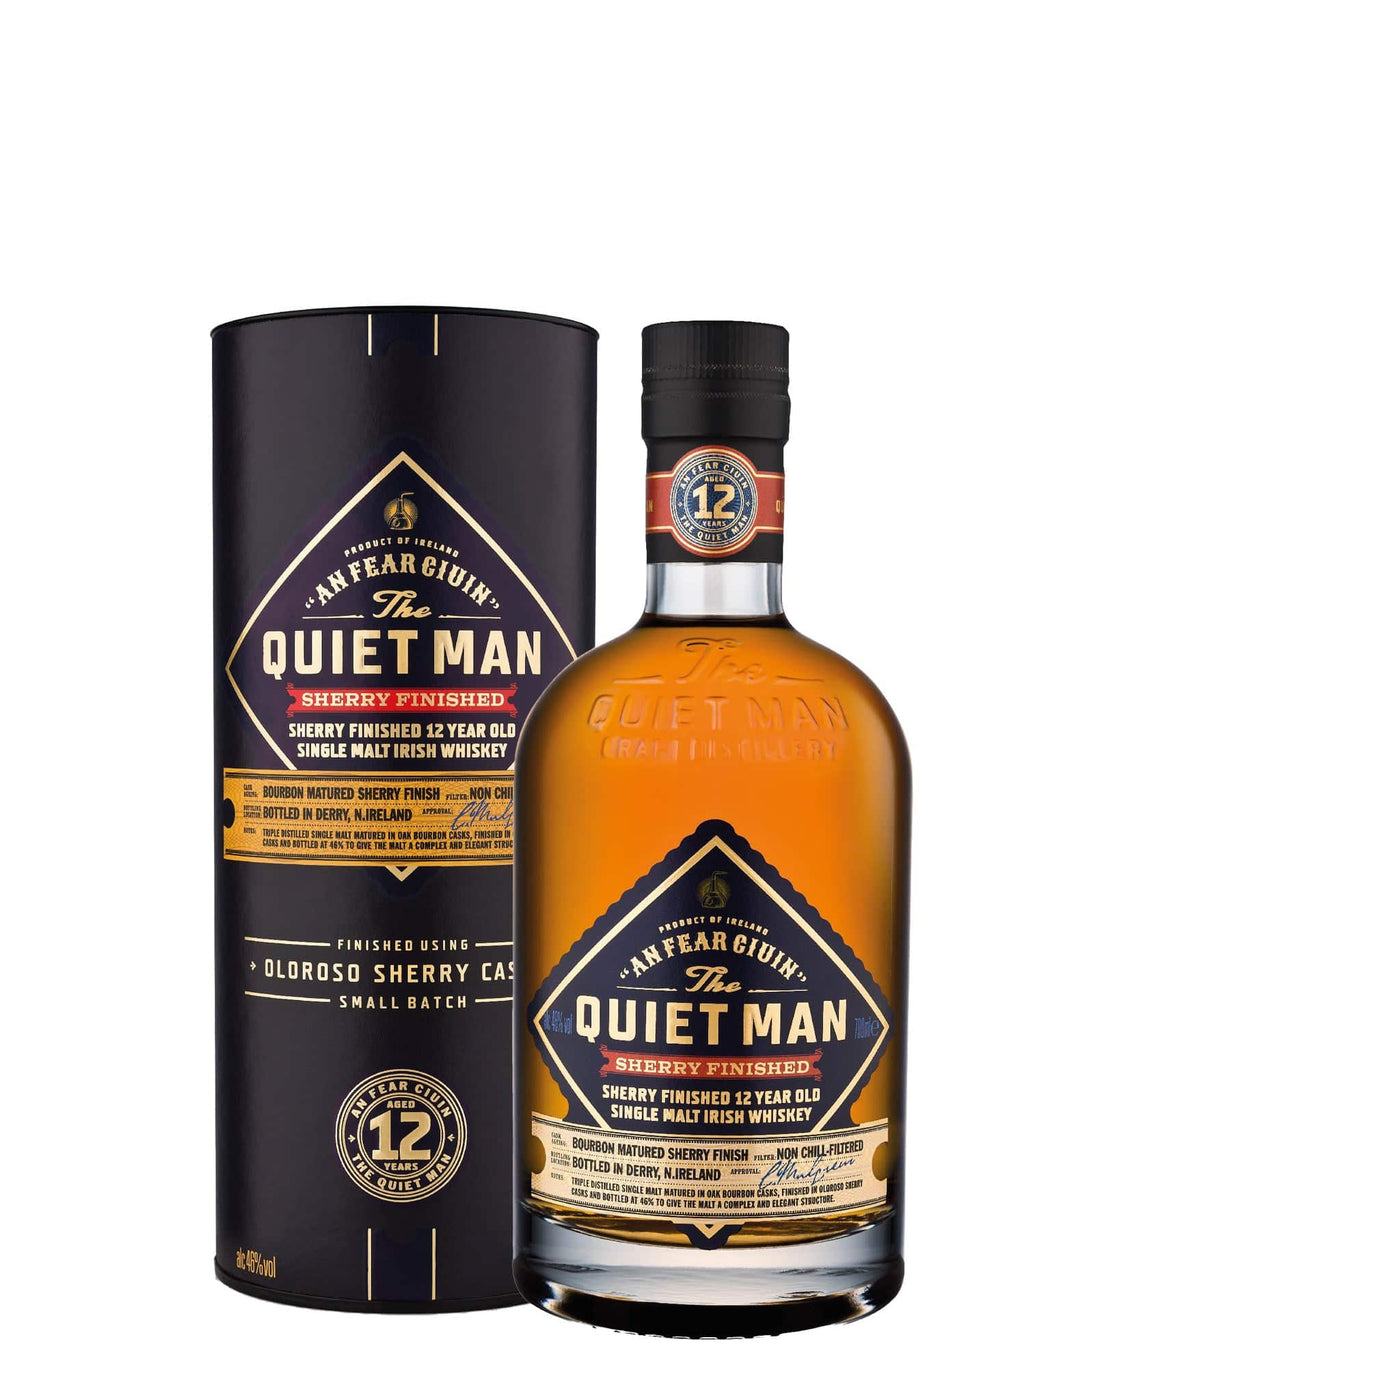 The Quiet Man 12 Year Old Sherry Finish Whiskey - Spiritly